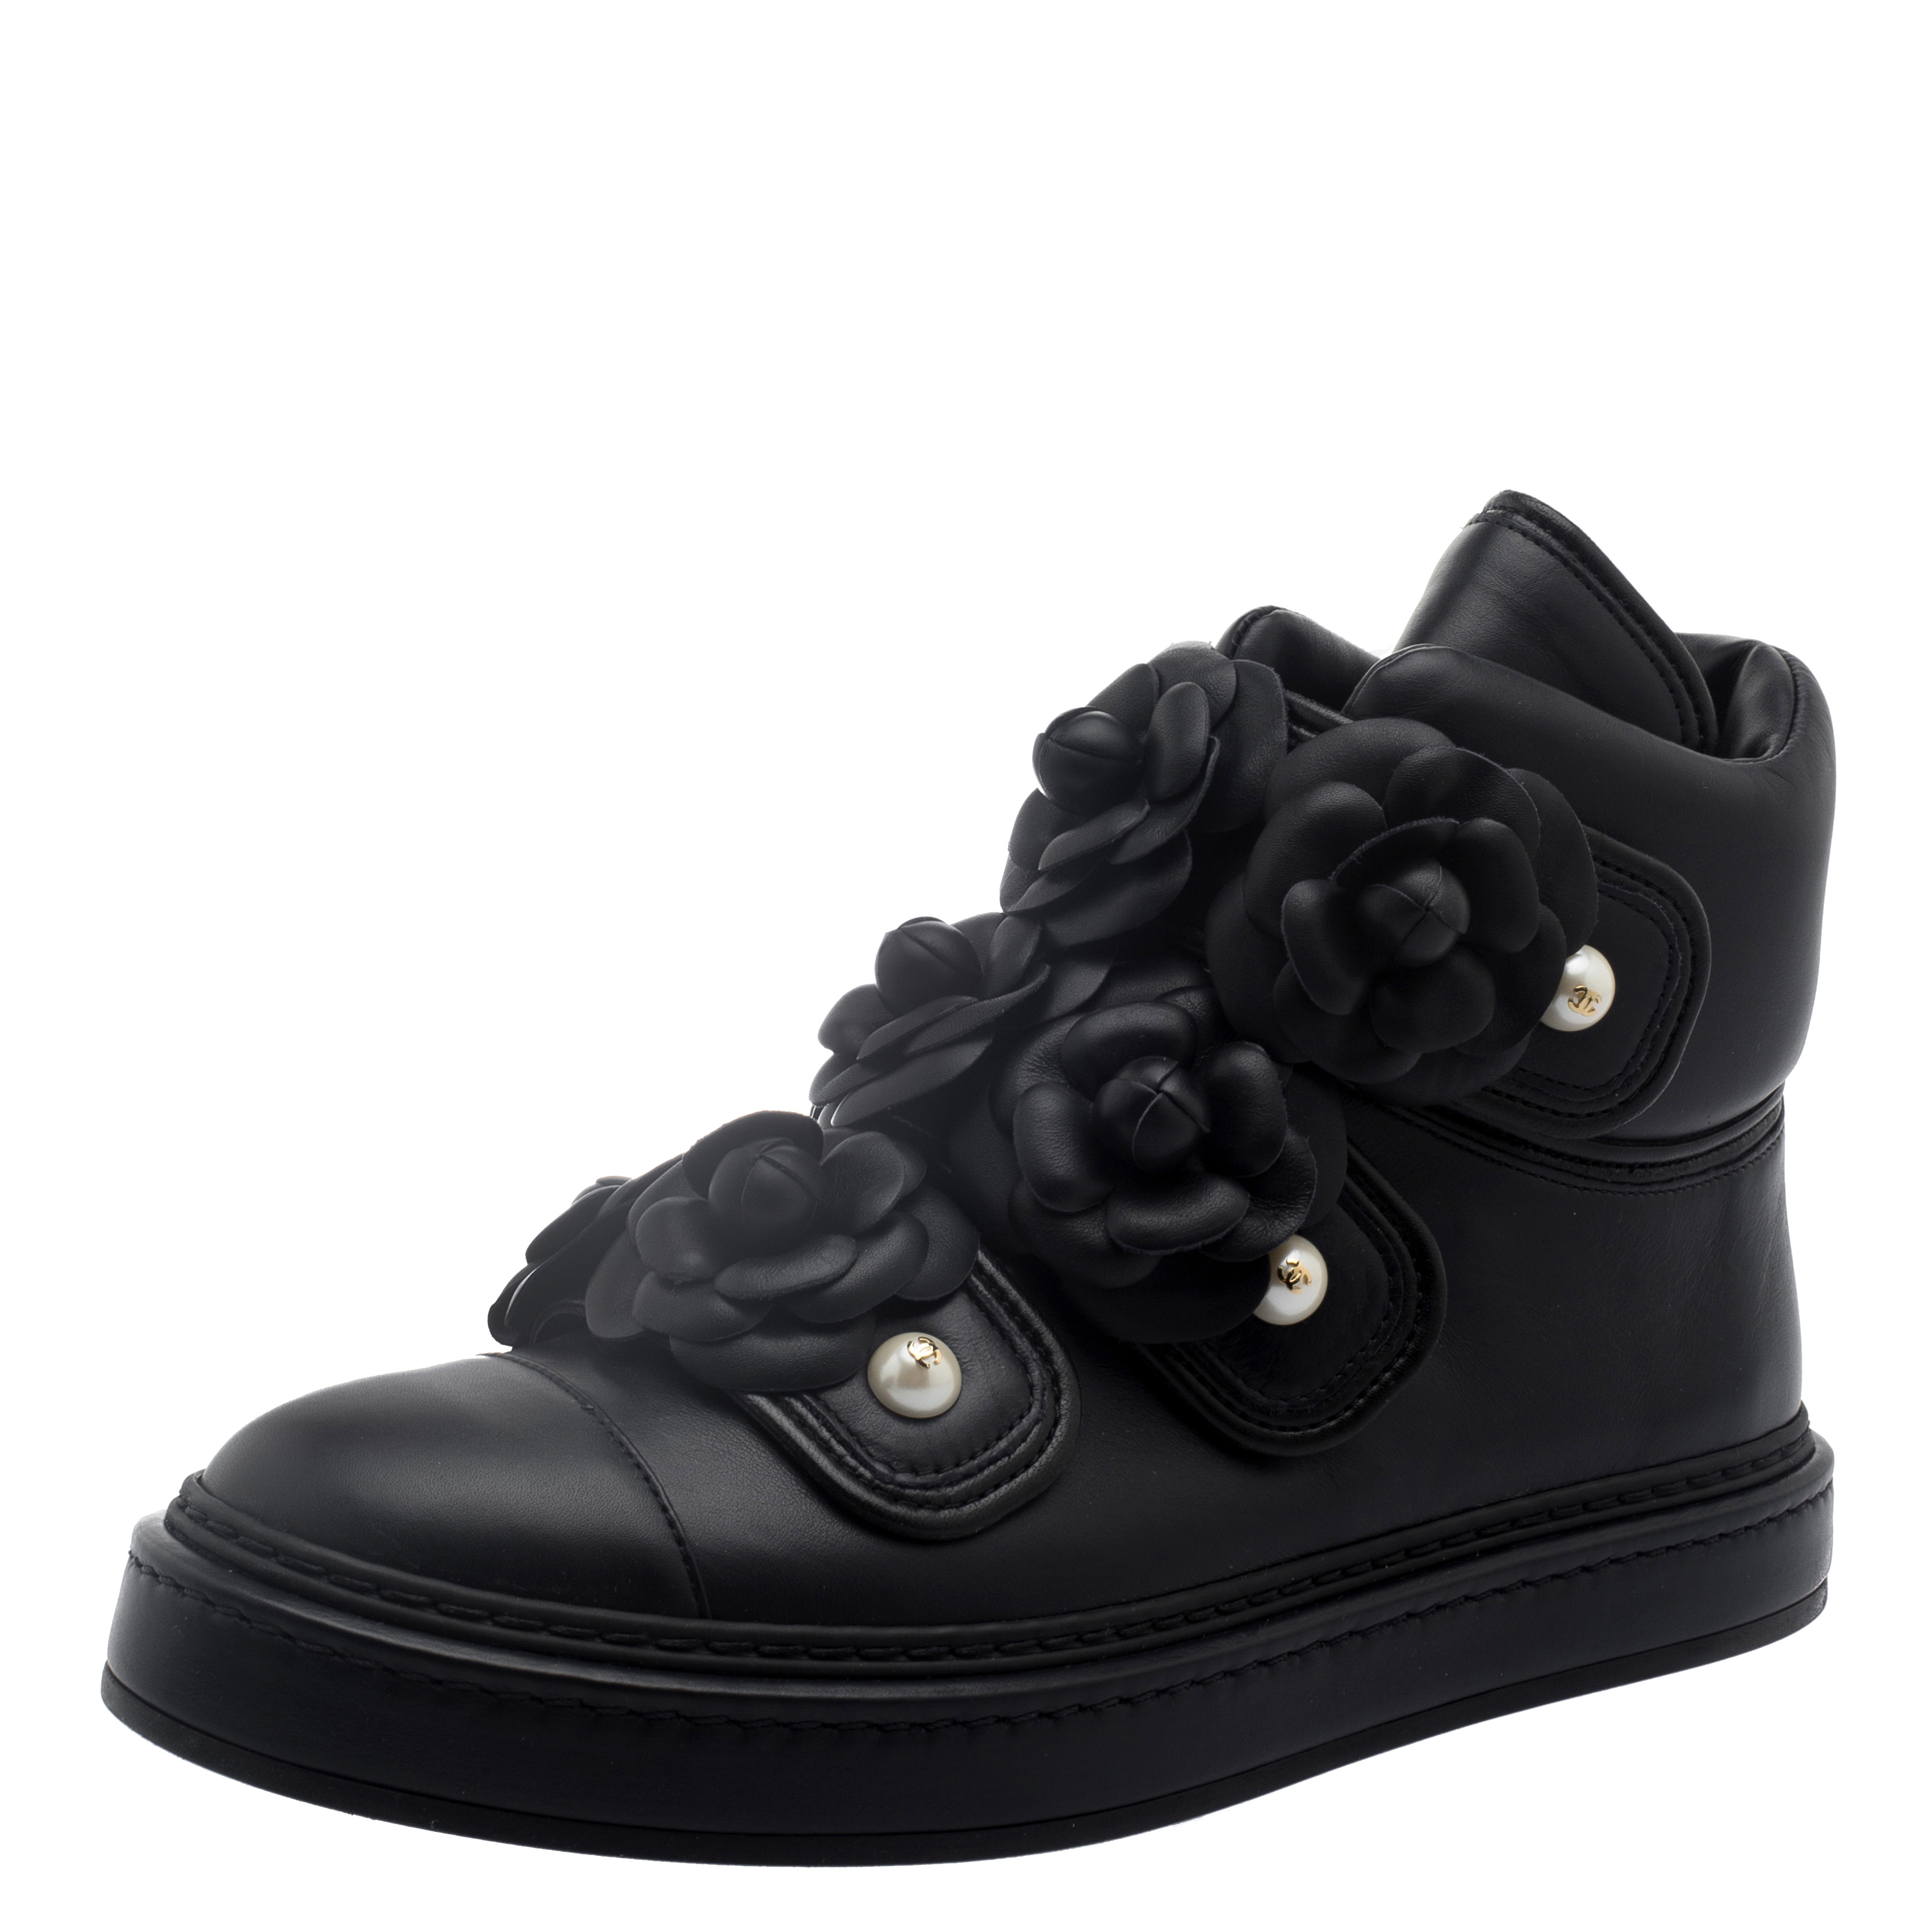 Chanel Black Leather Camellia Flowers Embellished High Top Sneakers Size   Chanel | TLC